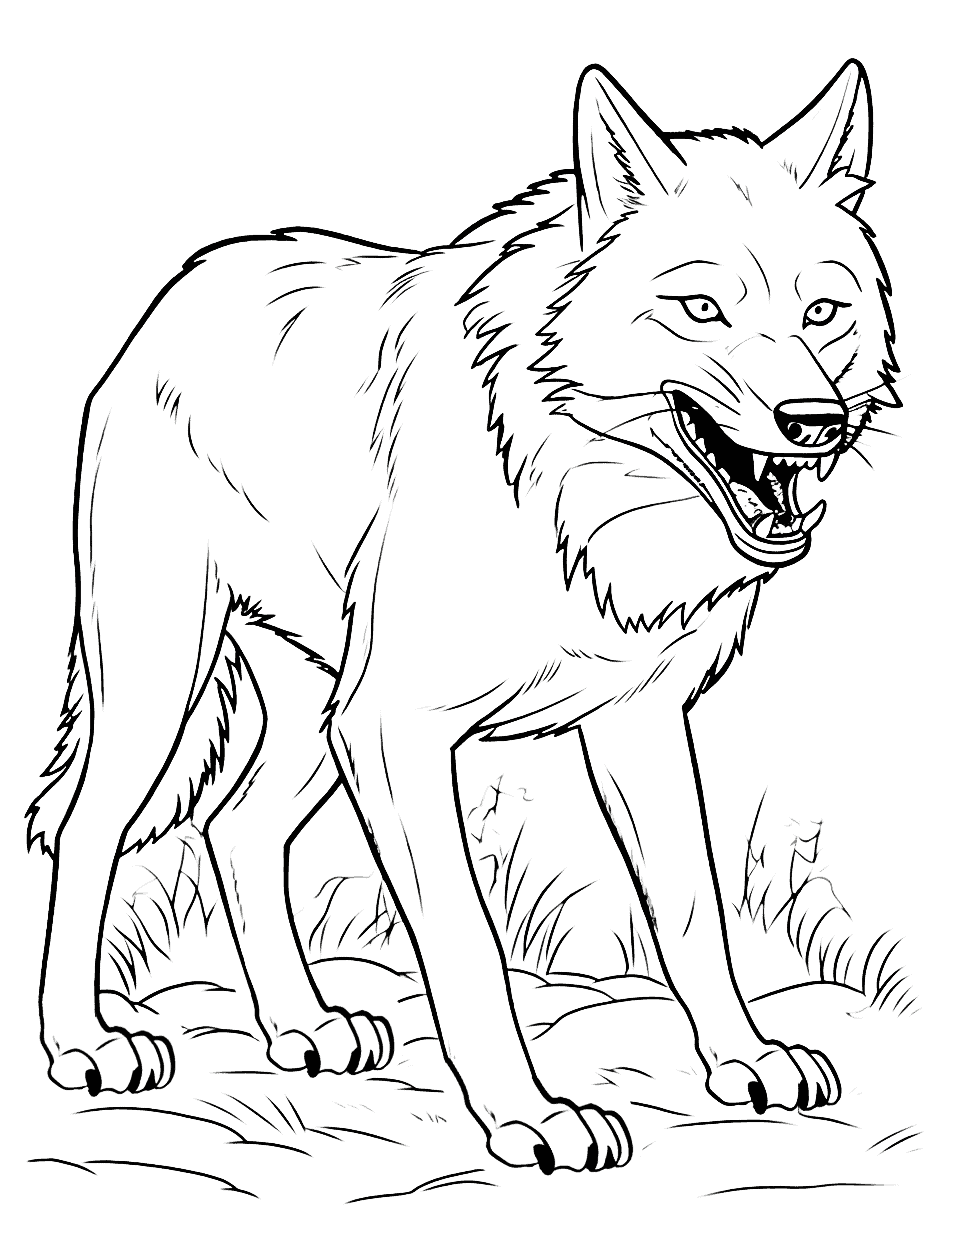 Angry Wolf Standoff Coloring Page - A wolf showing its teeth, protecting its territory from an intruder.